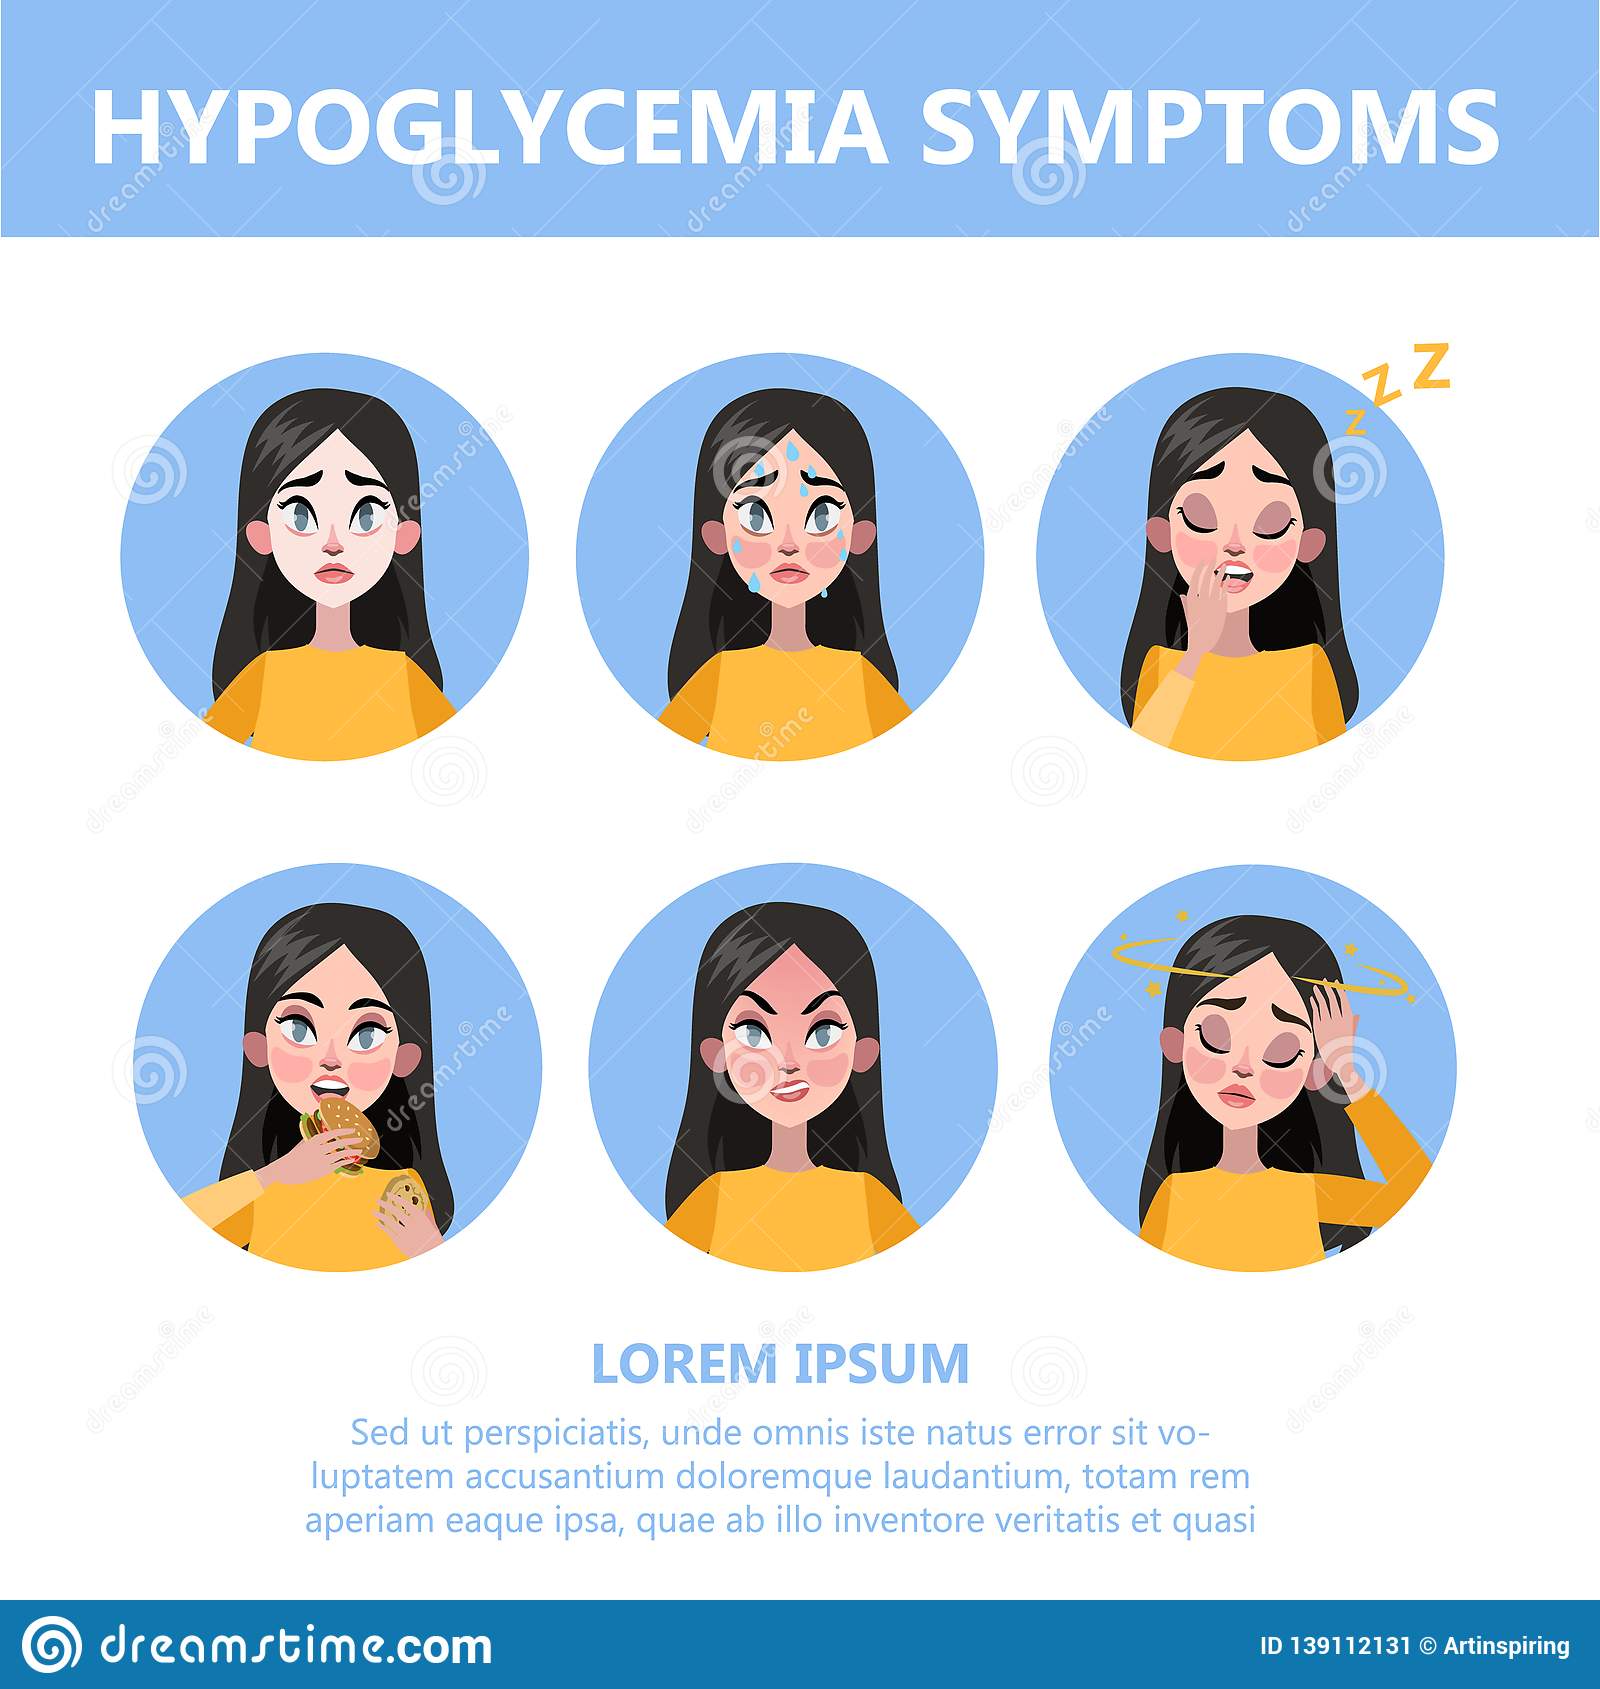 Hypoglycemia Symptoms Infographic. Low Glucose Level in Blood Stock ...